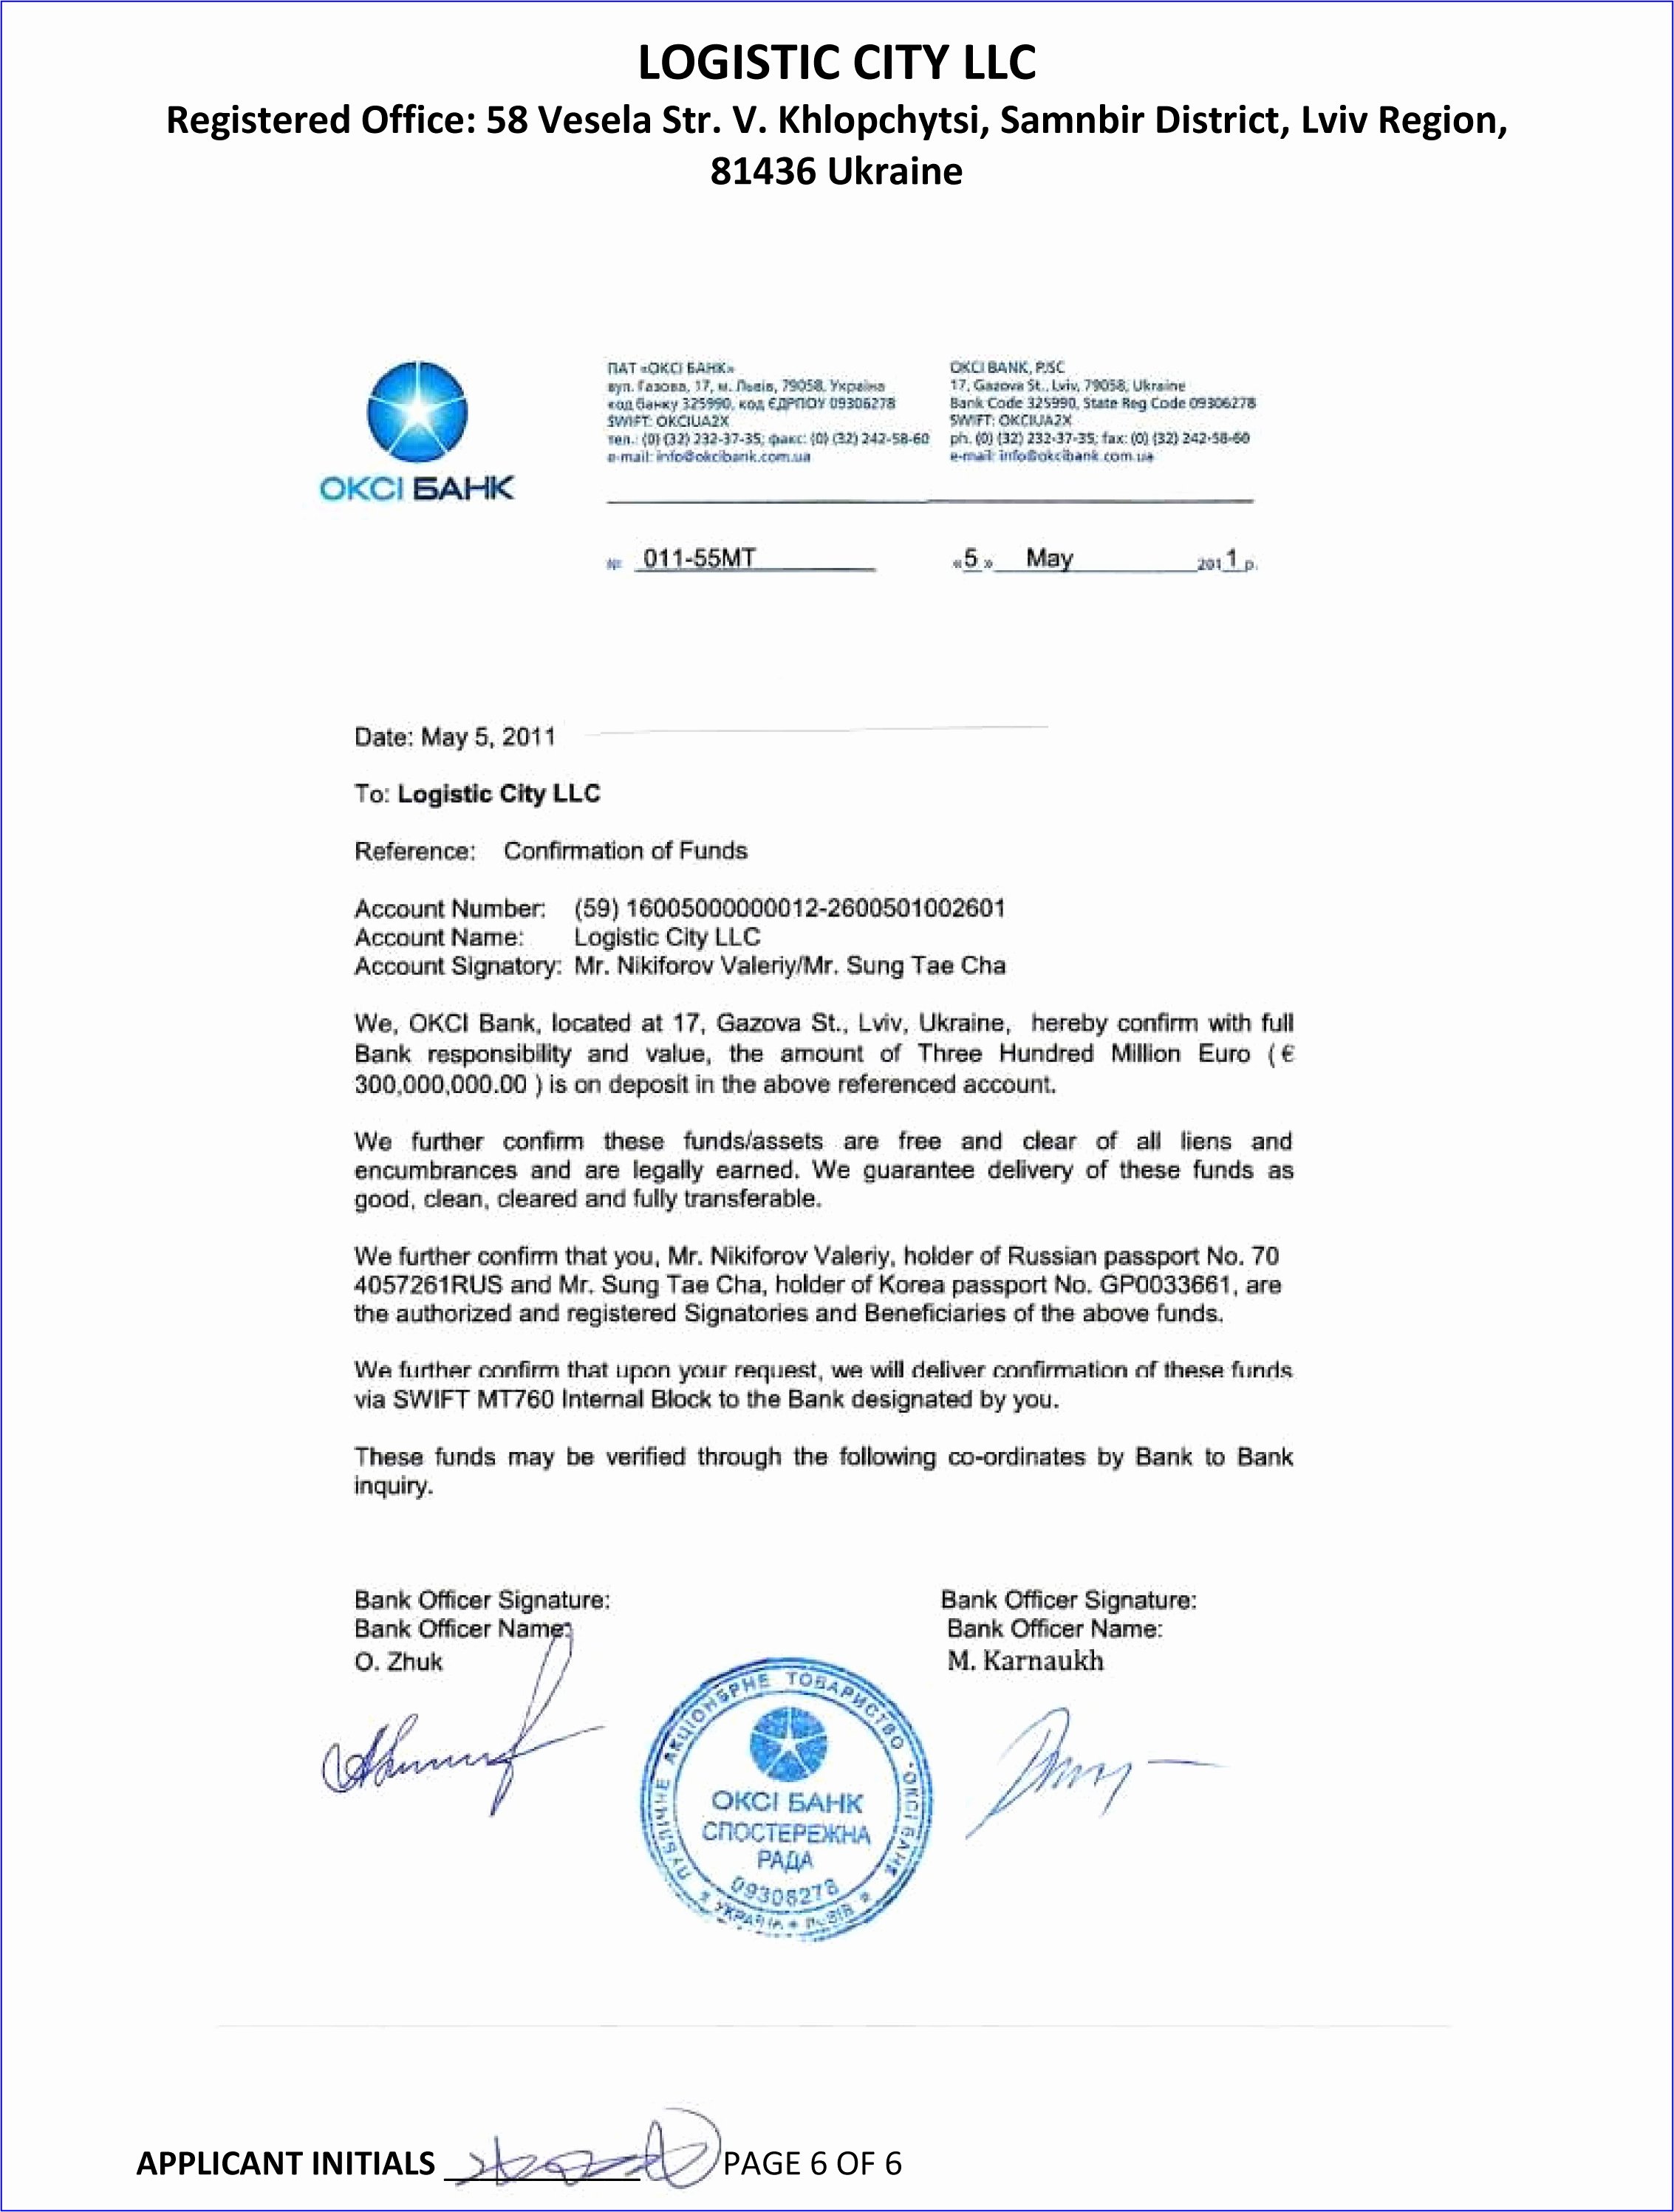 2011 300m okci bank confirmation of funds letter to logistic city